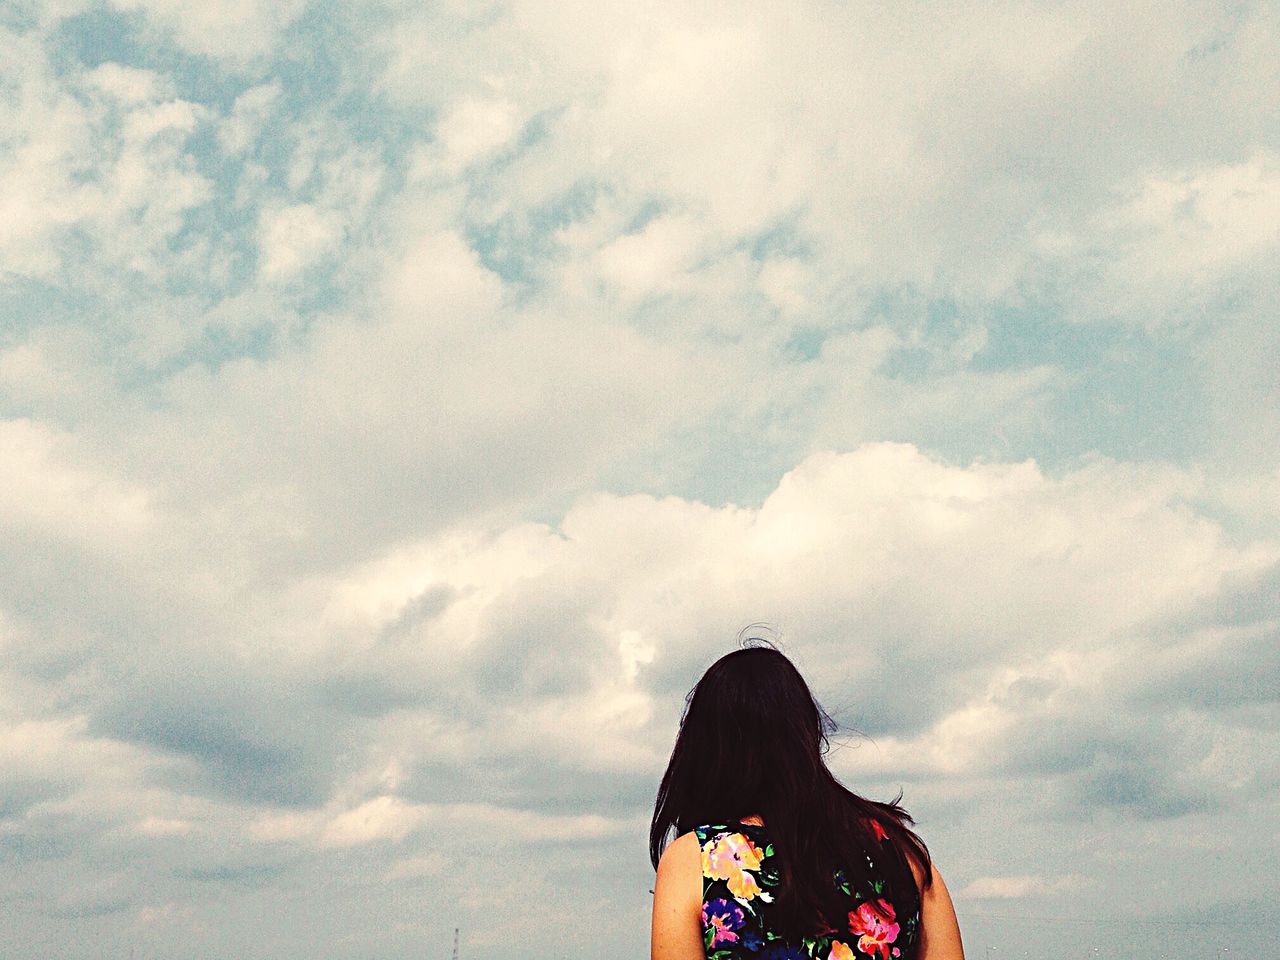 Rear view of woman against cloudy sky